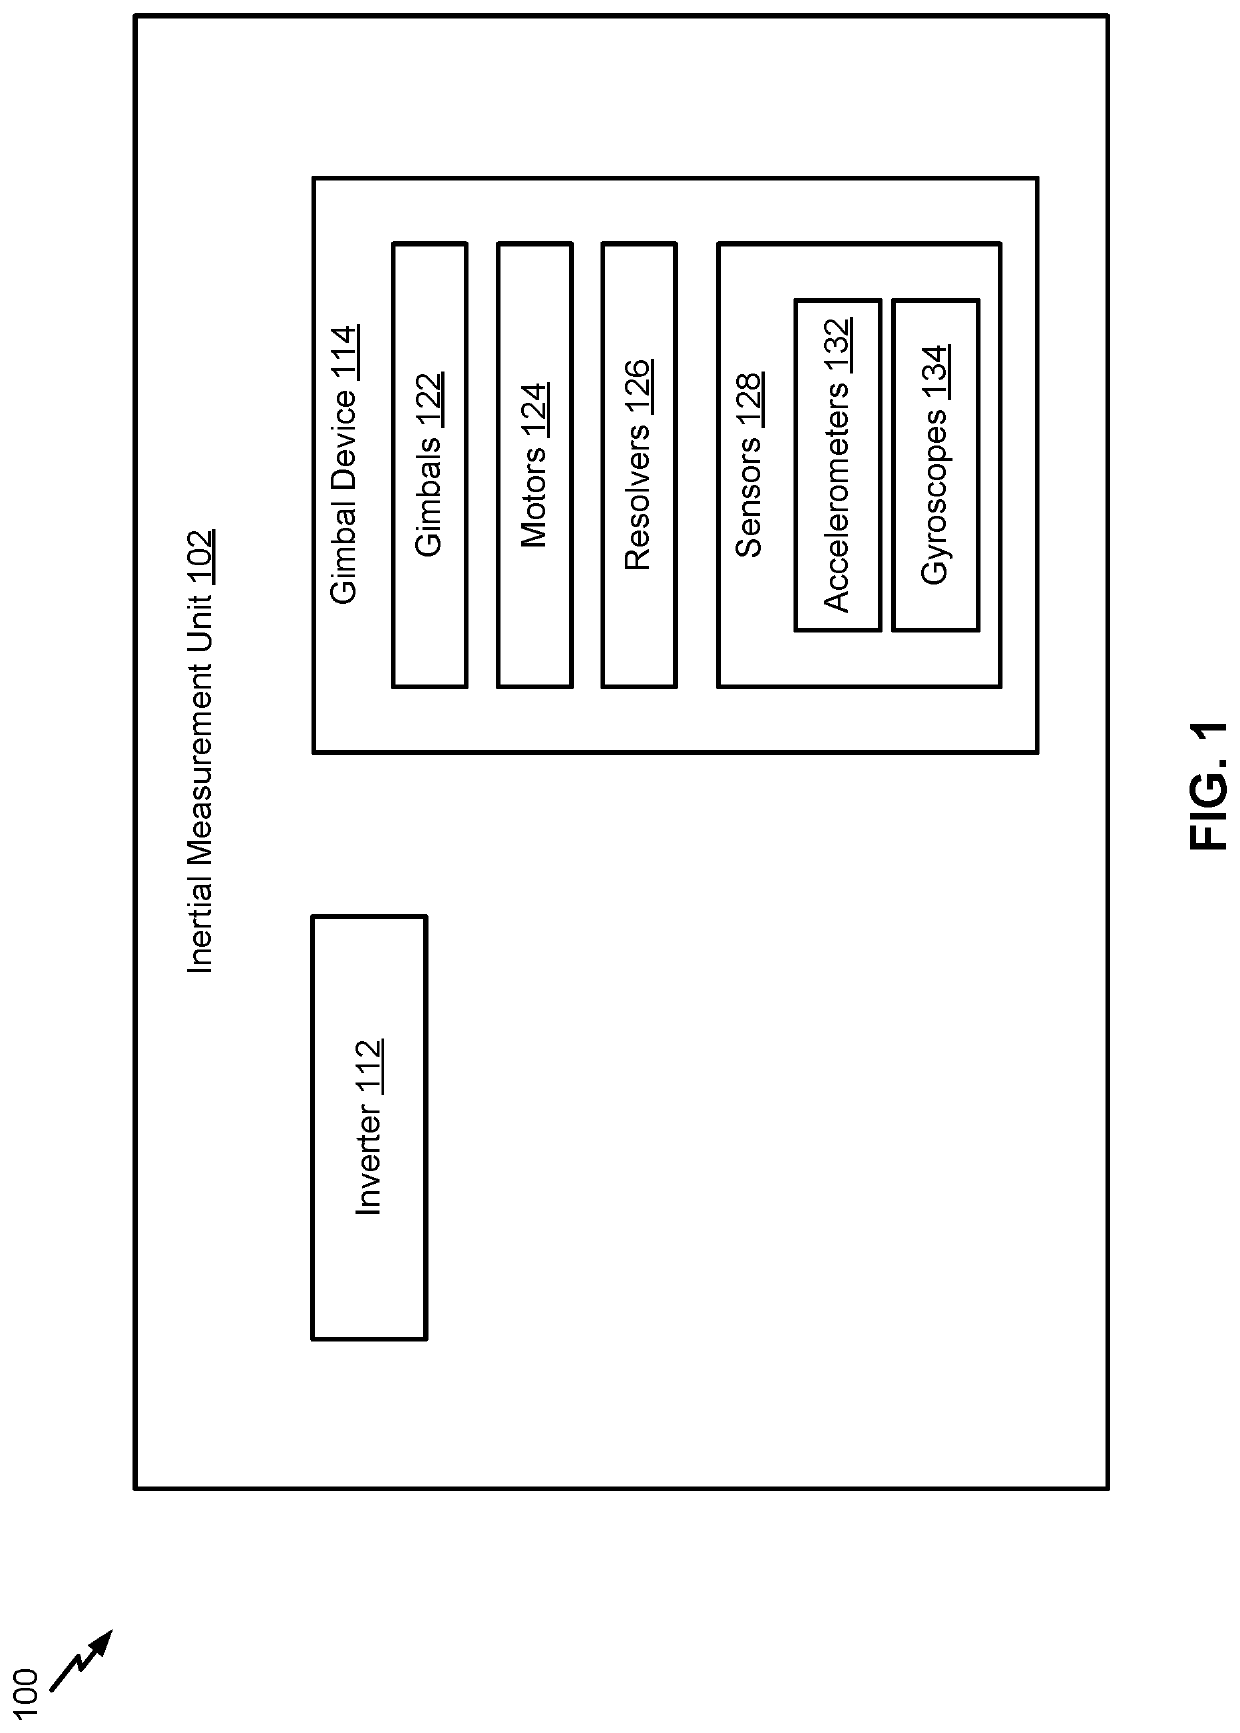 System and method for demodulation of resolver outputs